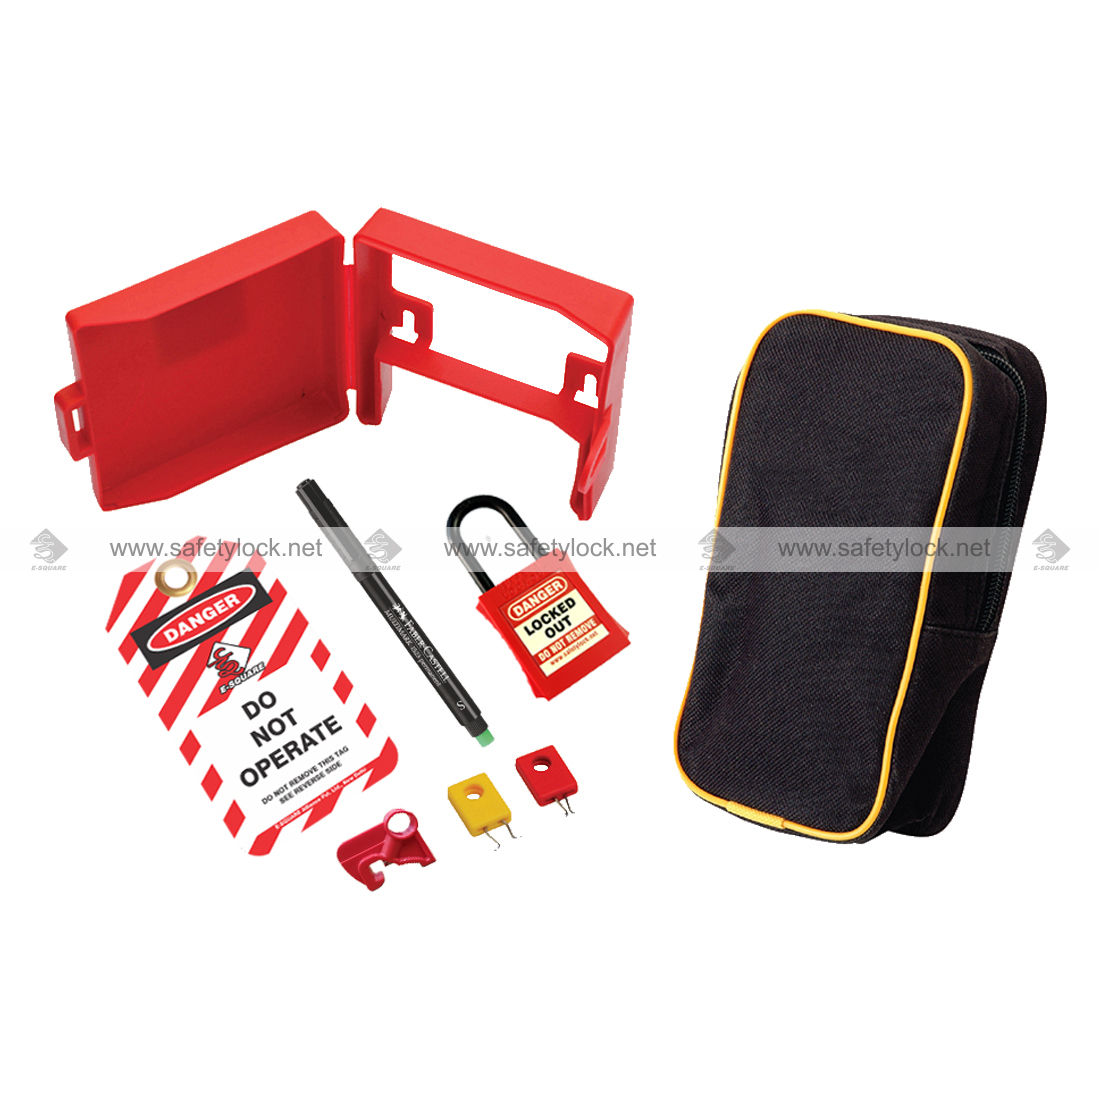 Customised Your Ideal Lockout Tagout Kit with ESquare Allia - Delhi - Delhi ID1557058